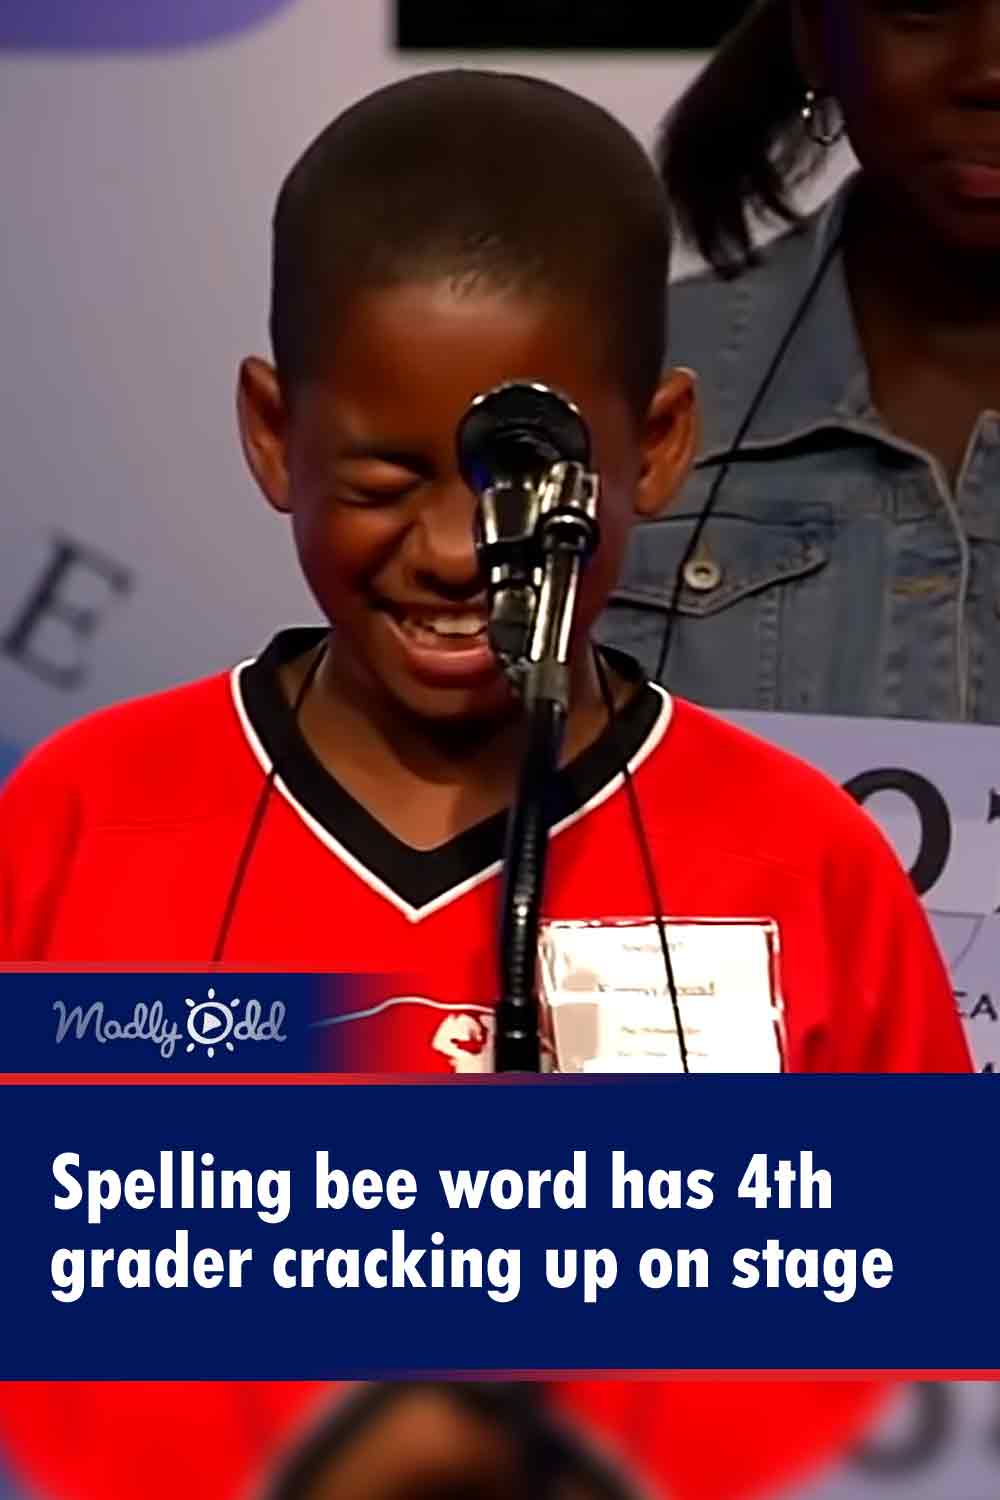 Spelling bee word has 4th grader cracking up on stage